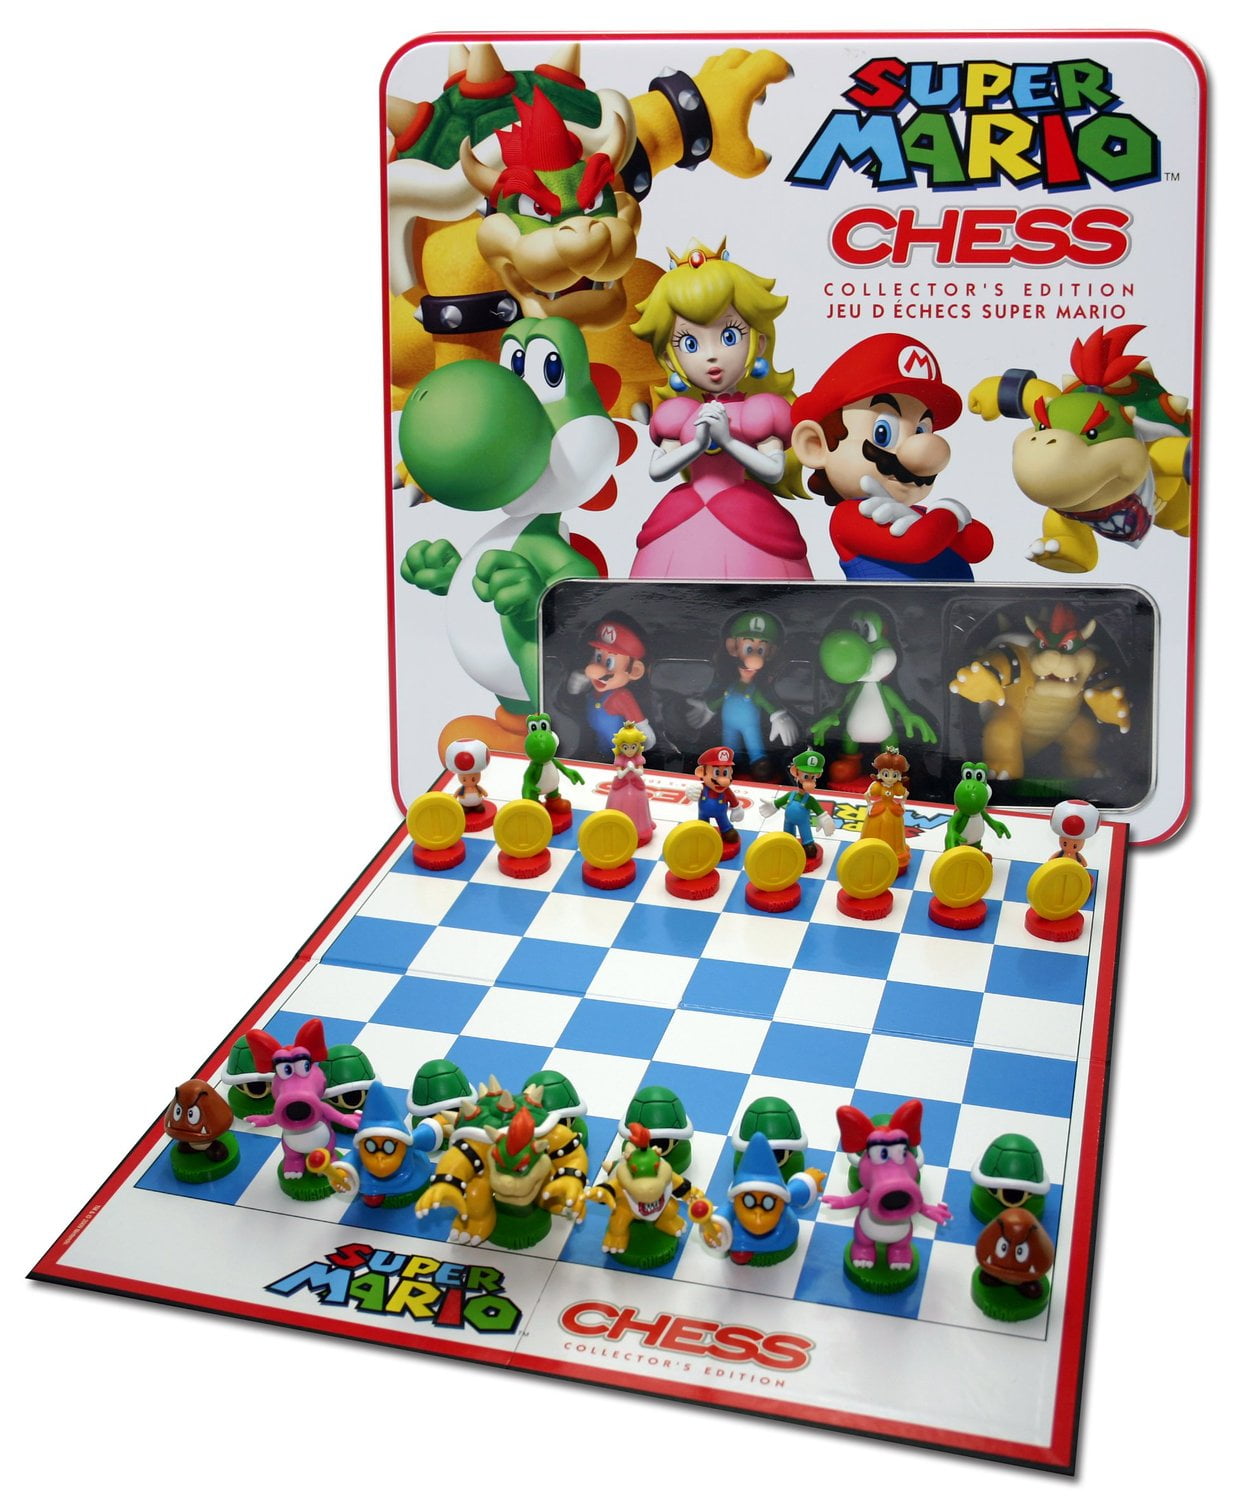 Super Mario Chess Collectors Edition 2010 USAopoly Bonus for sale online 